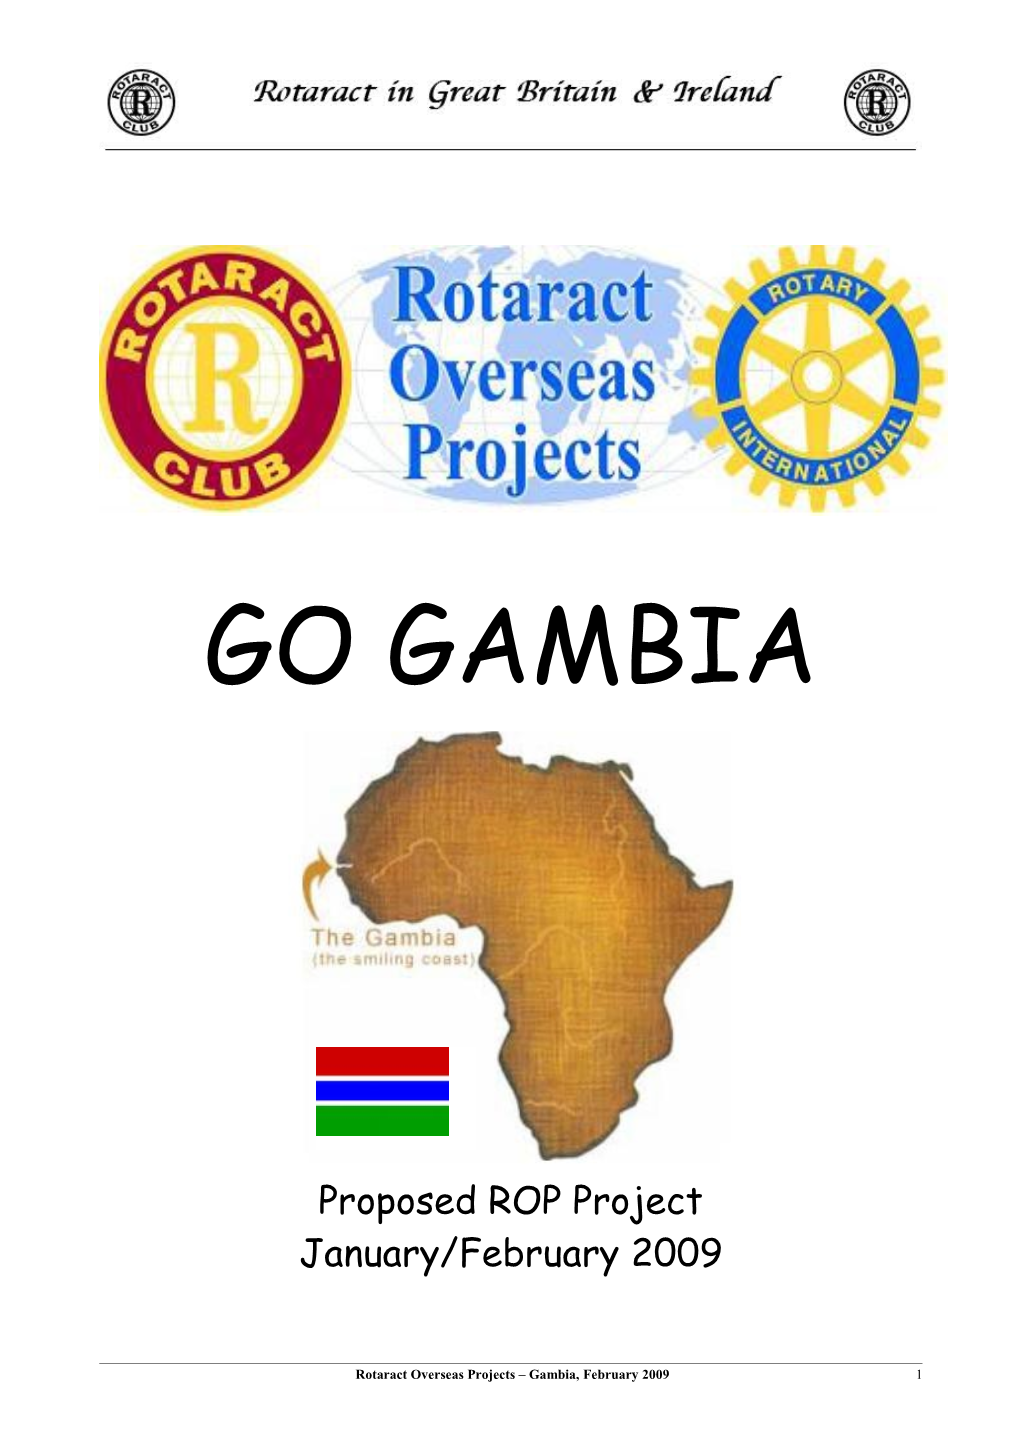 ROTARACT OVERSEAS PROJECT the Gambia, West Africa